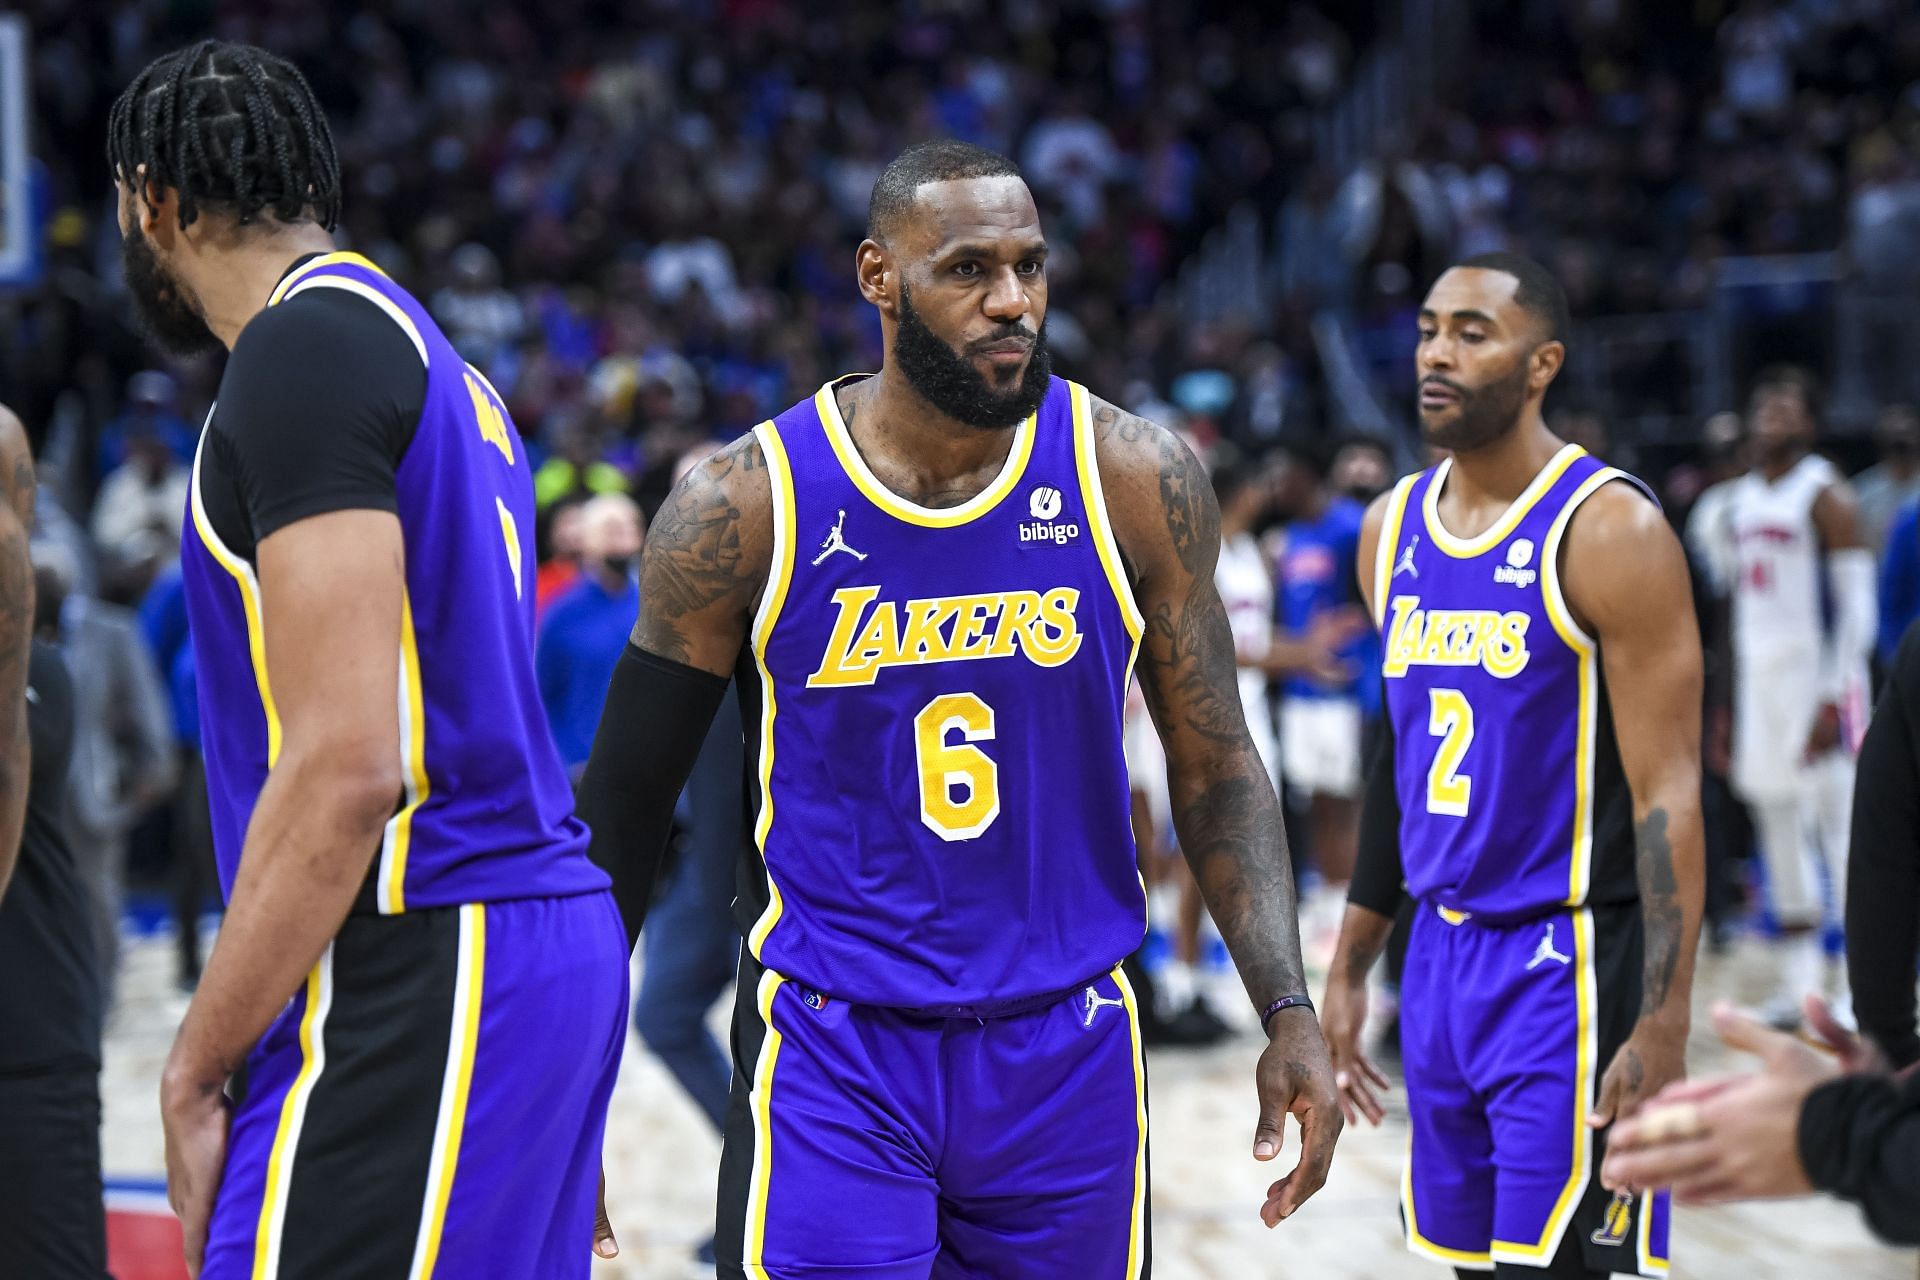 LeBron James sparked a flurry of activity on social media following his ejection in the Lakers-Pistons game.